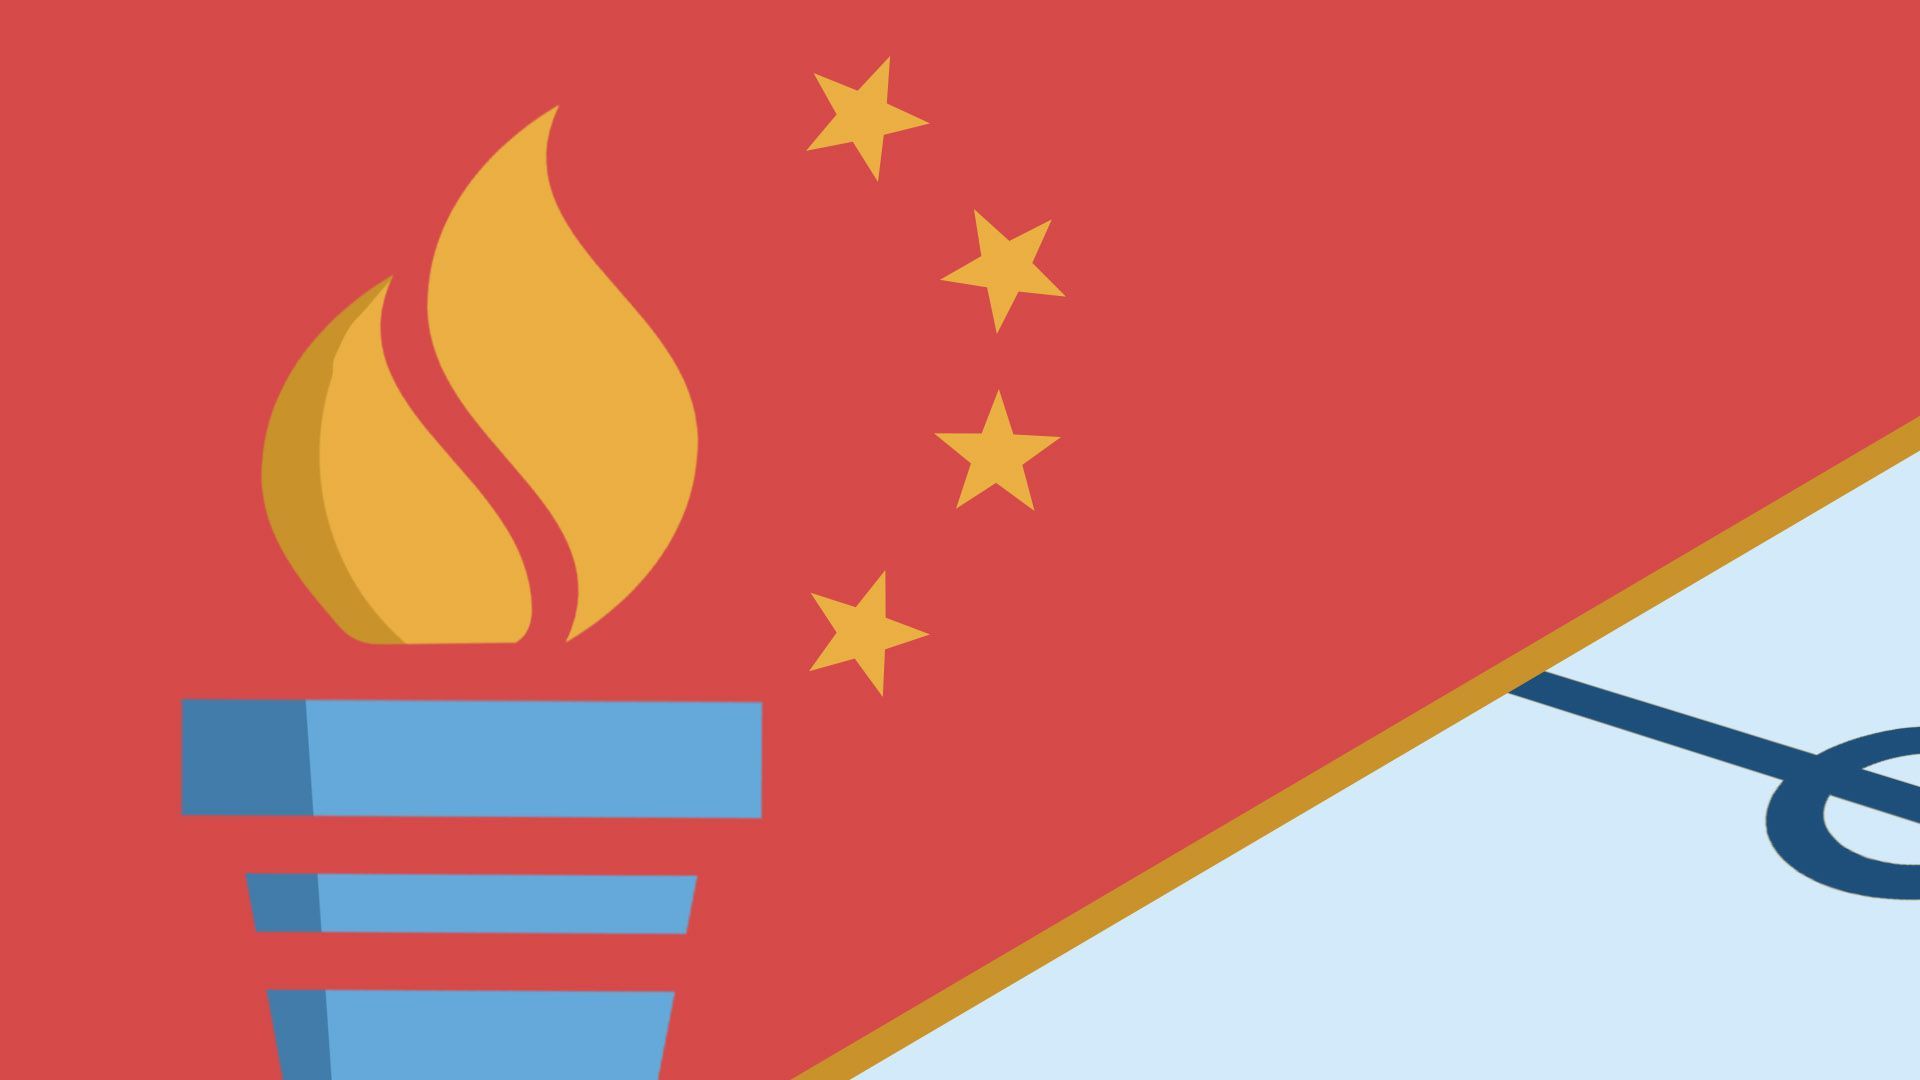 Illustration of an olympic torch with the stars of the Chinese flag beside an ice hockey ring